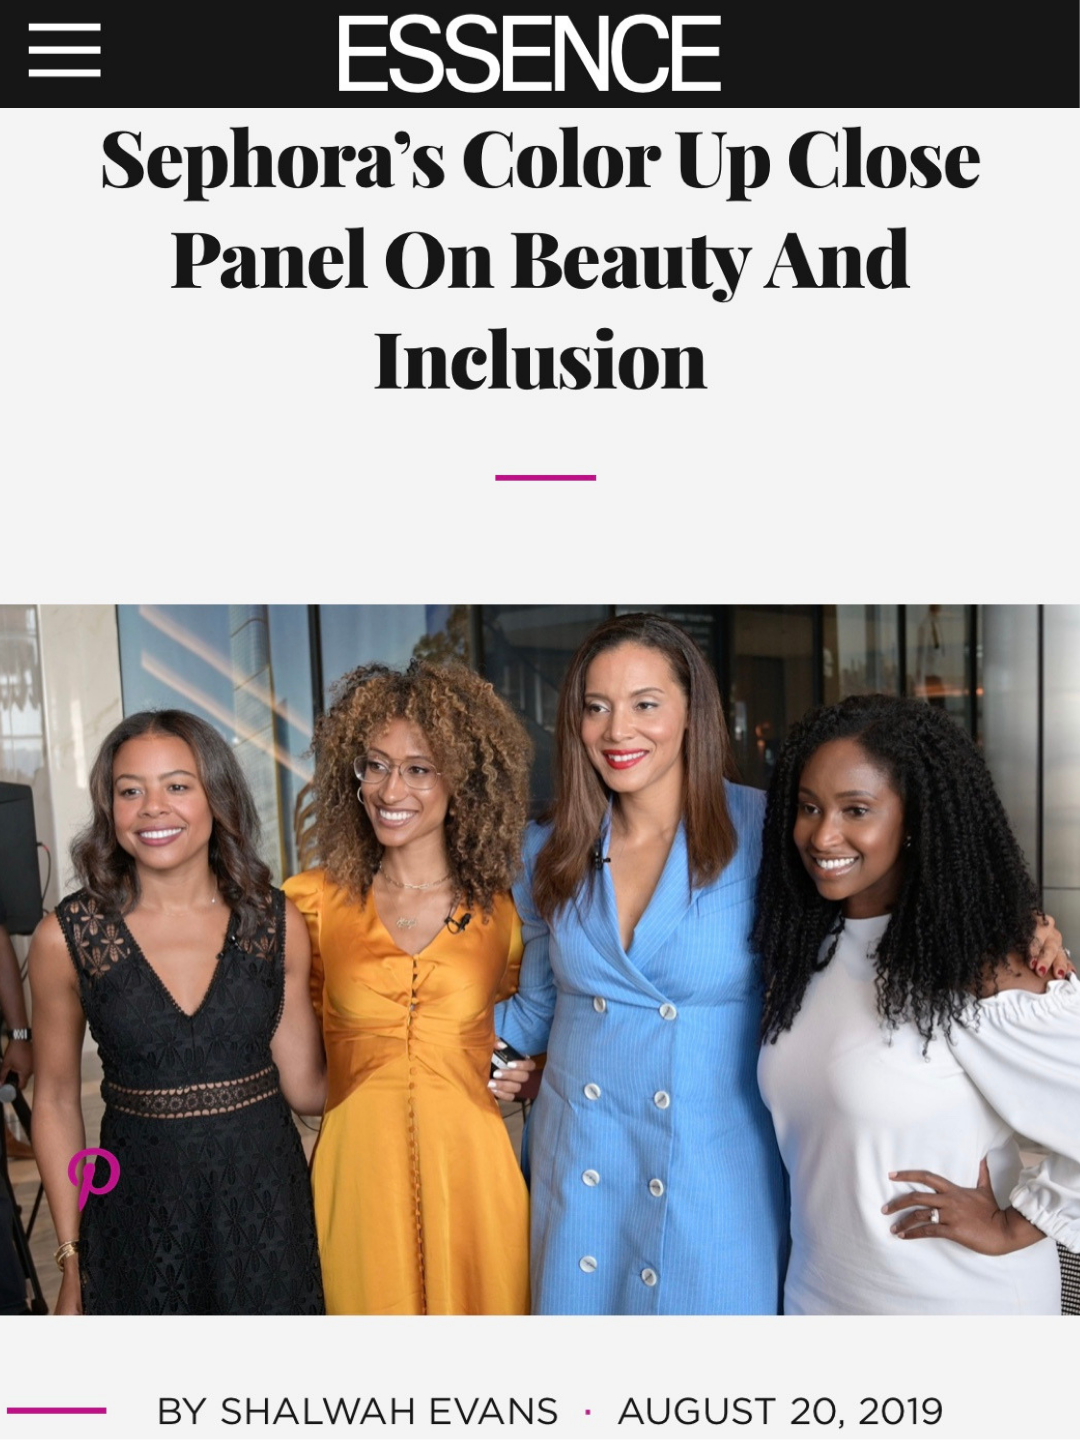 Elaine Welteroth Hosts Sephora's Color Up Close Panel On Beauty And Inclusion